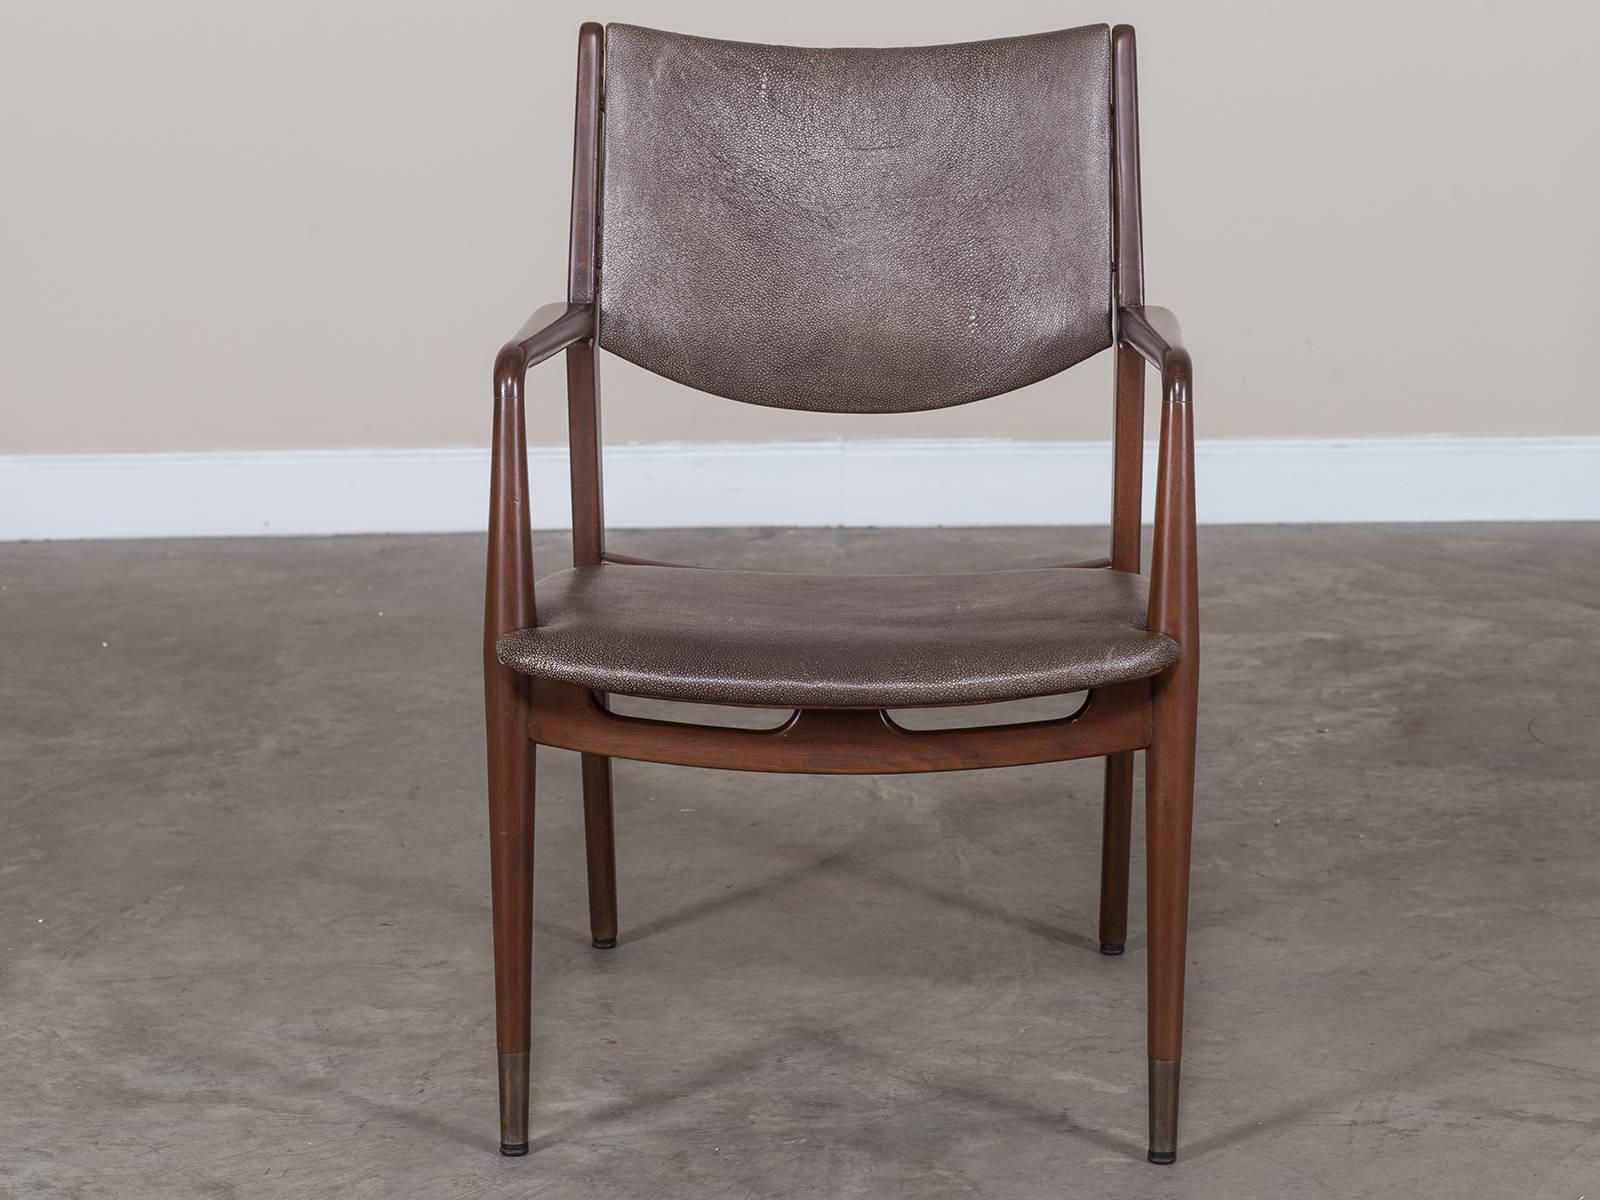 Receive our new selections direct from 1stdibs by email each week. Please click Follow Dealer below and see them first!

The clean modern lines of this Danish modern armchair circa 1965 remain as striking now as when it first appeared during the